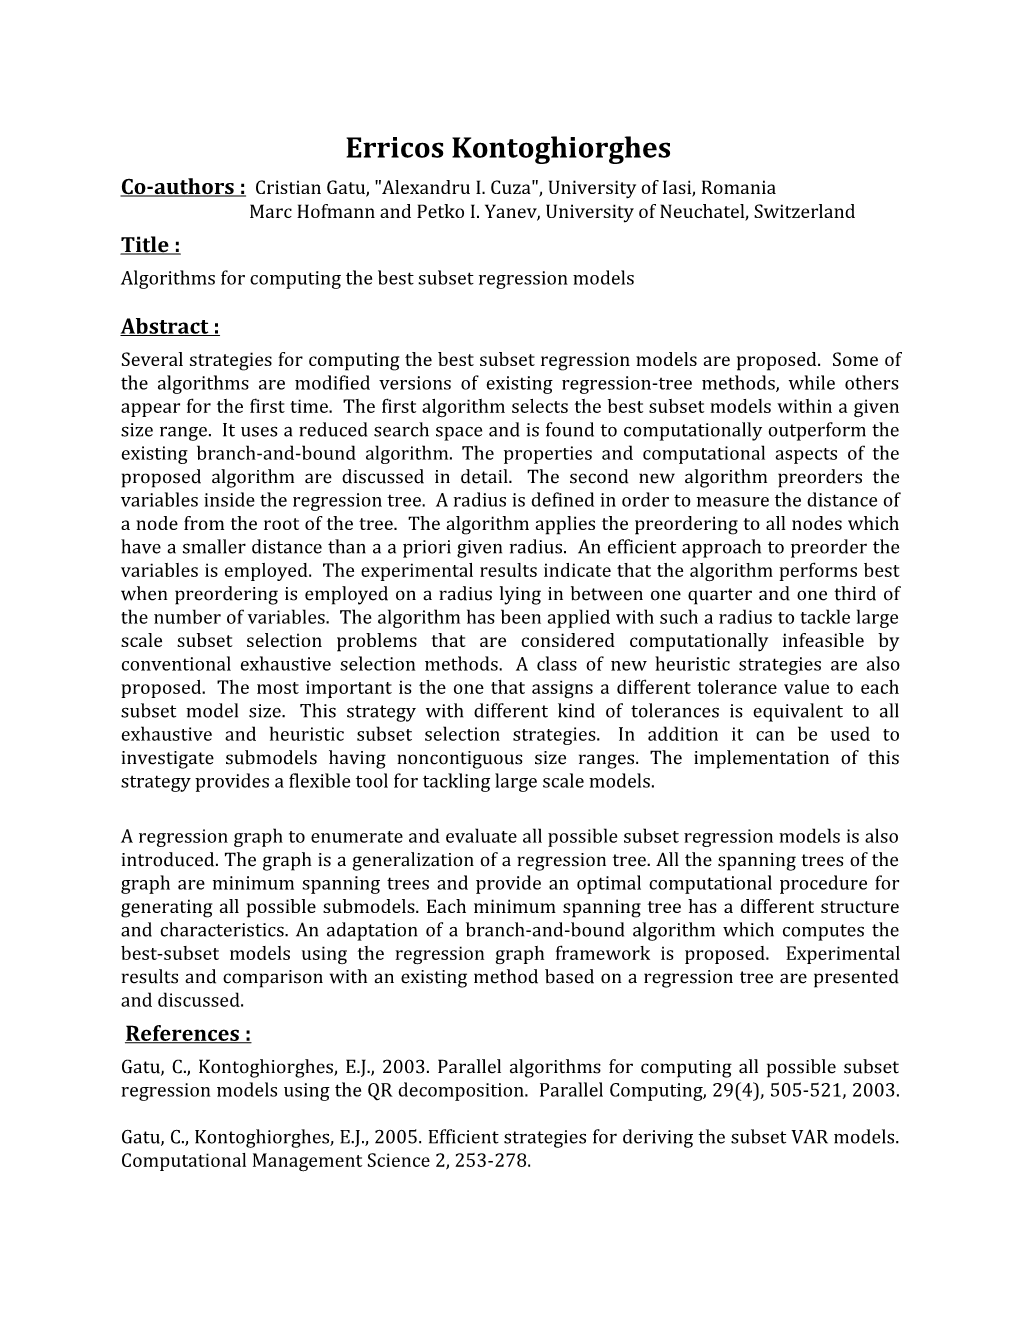 Algorithms for Computing the Best Subset Regression Models Abstract